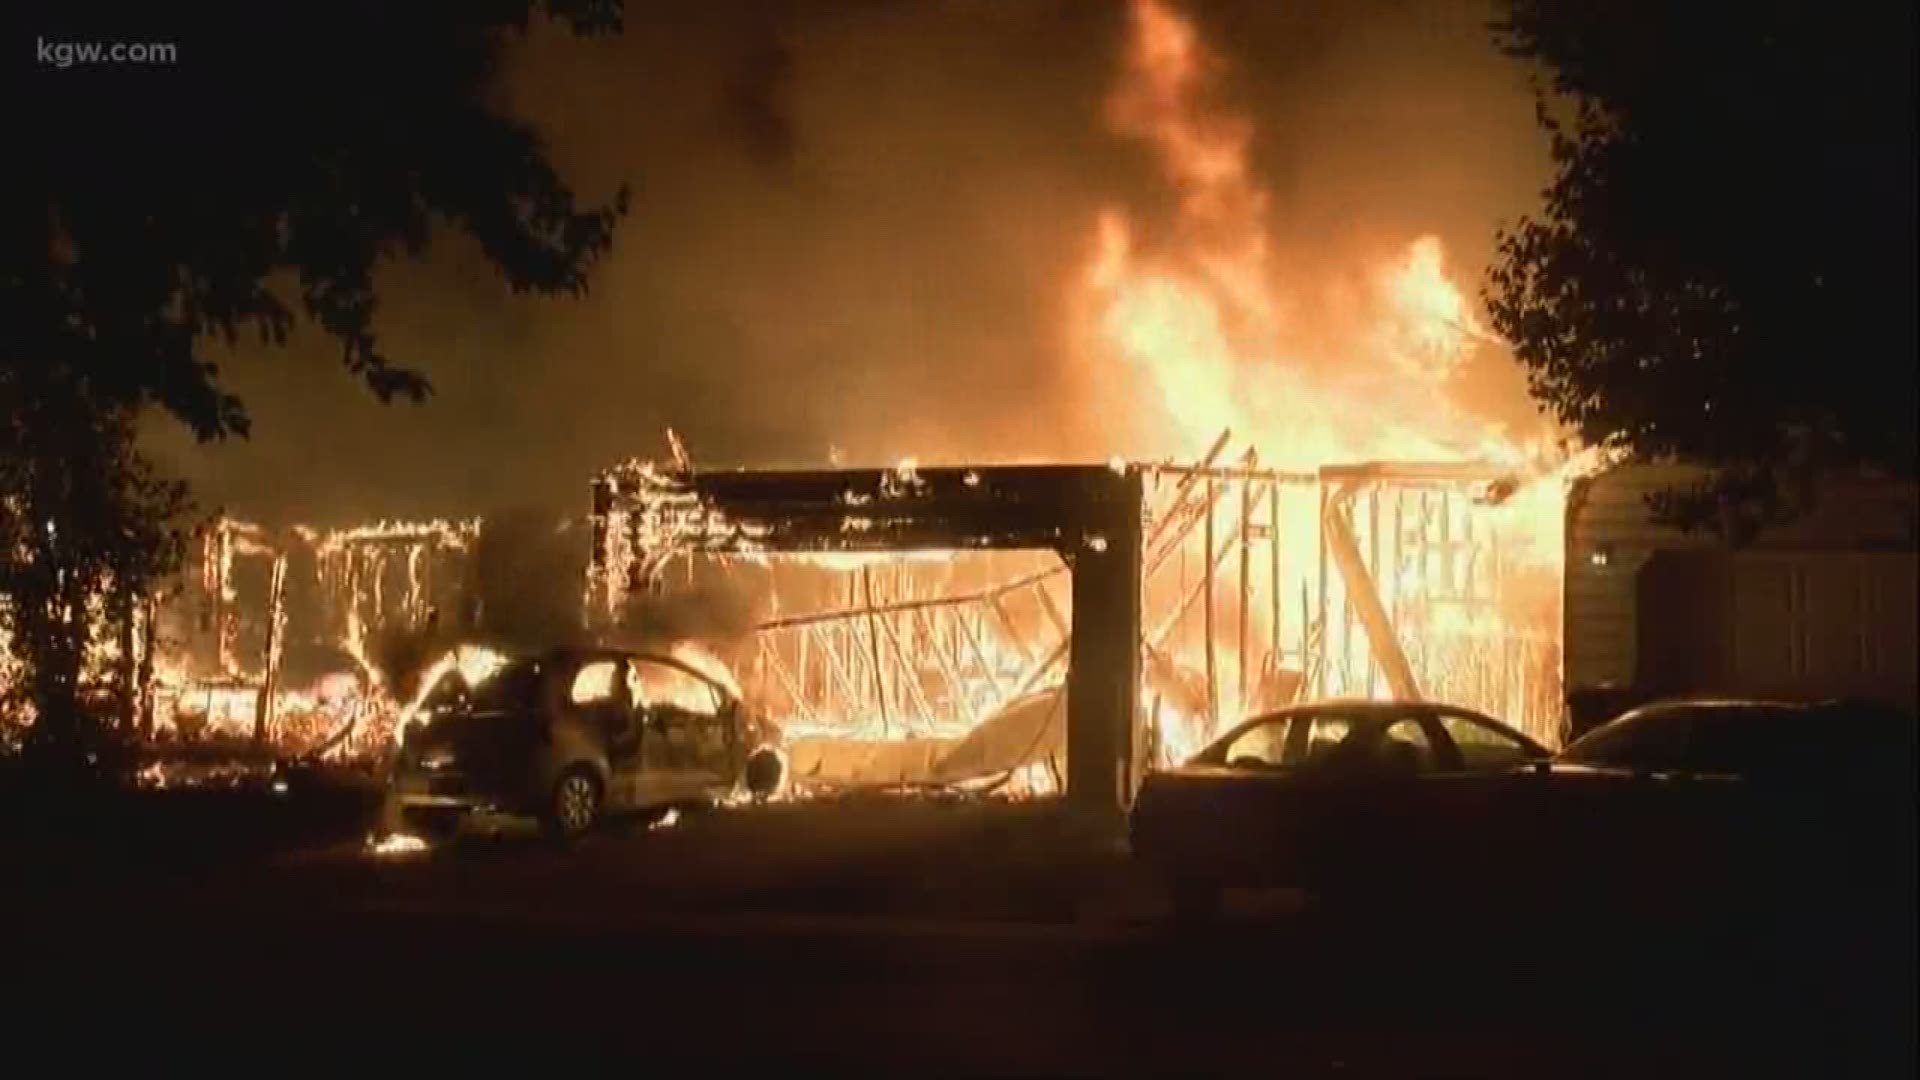 Springfield neighbors watched horror unfold as flames and gunfire break out.